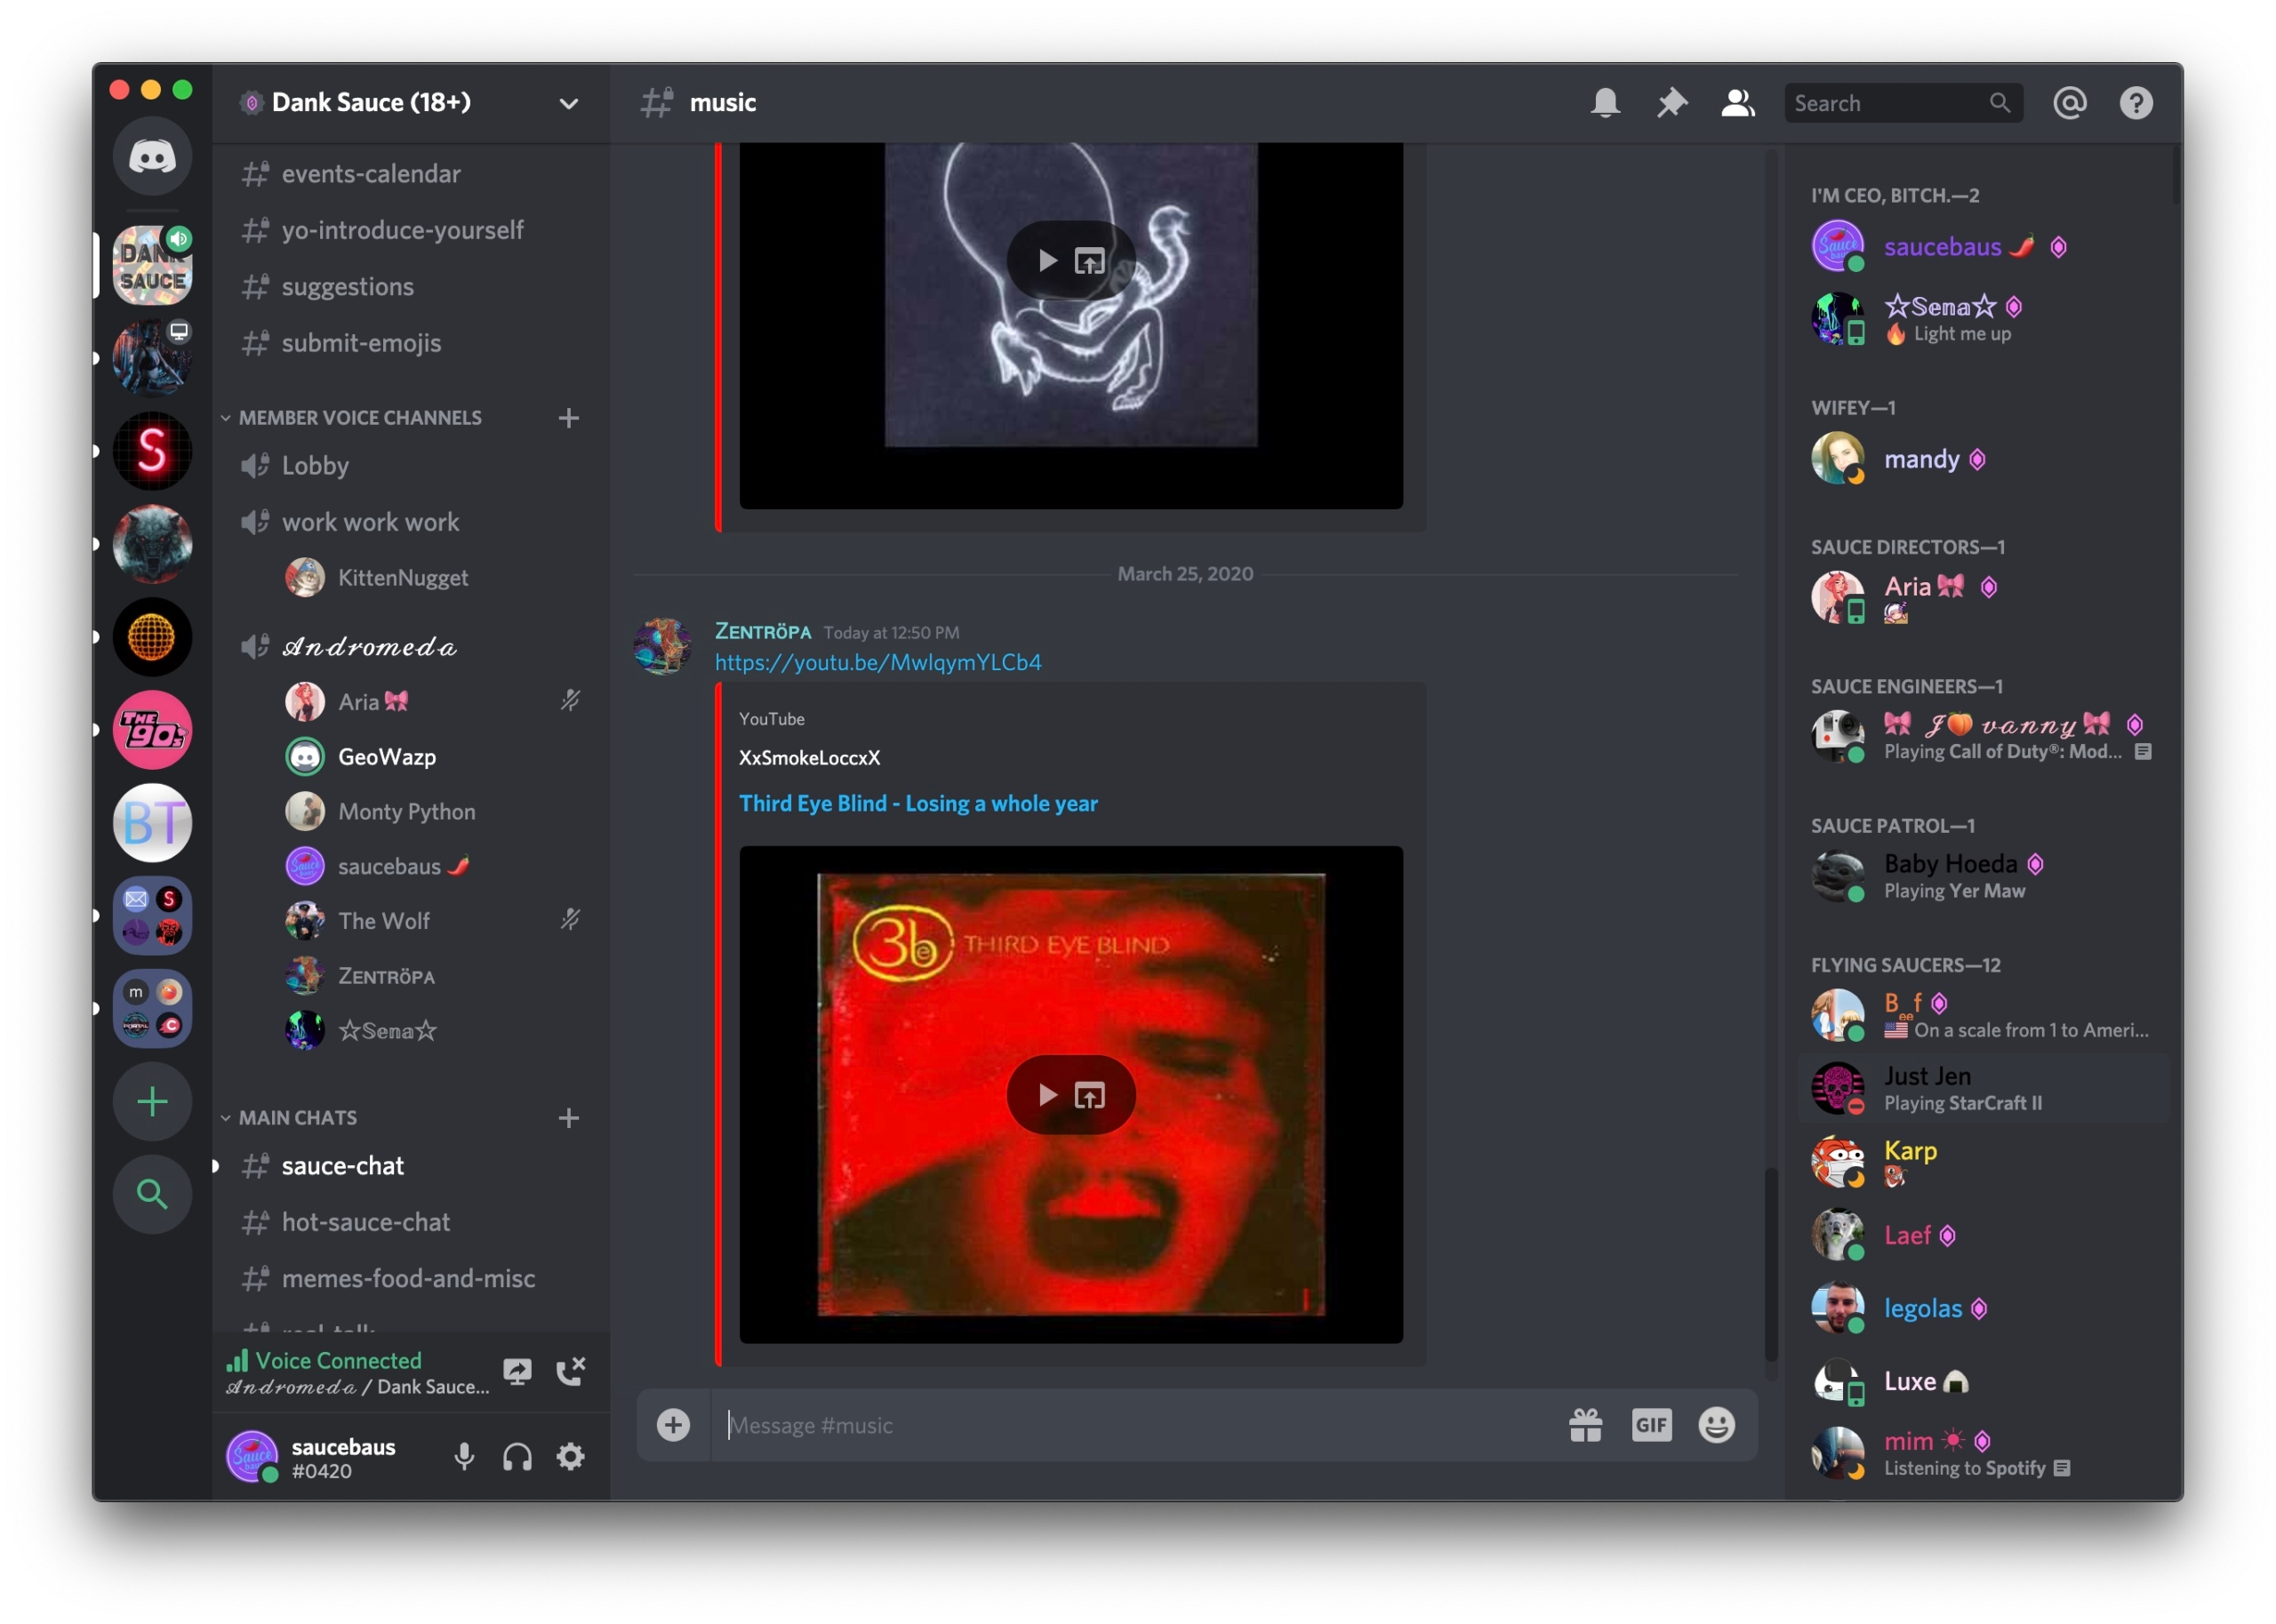 A Discord voice chat room.